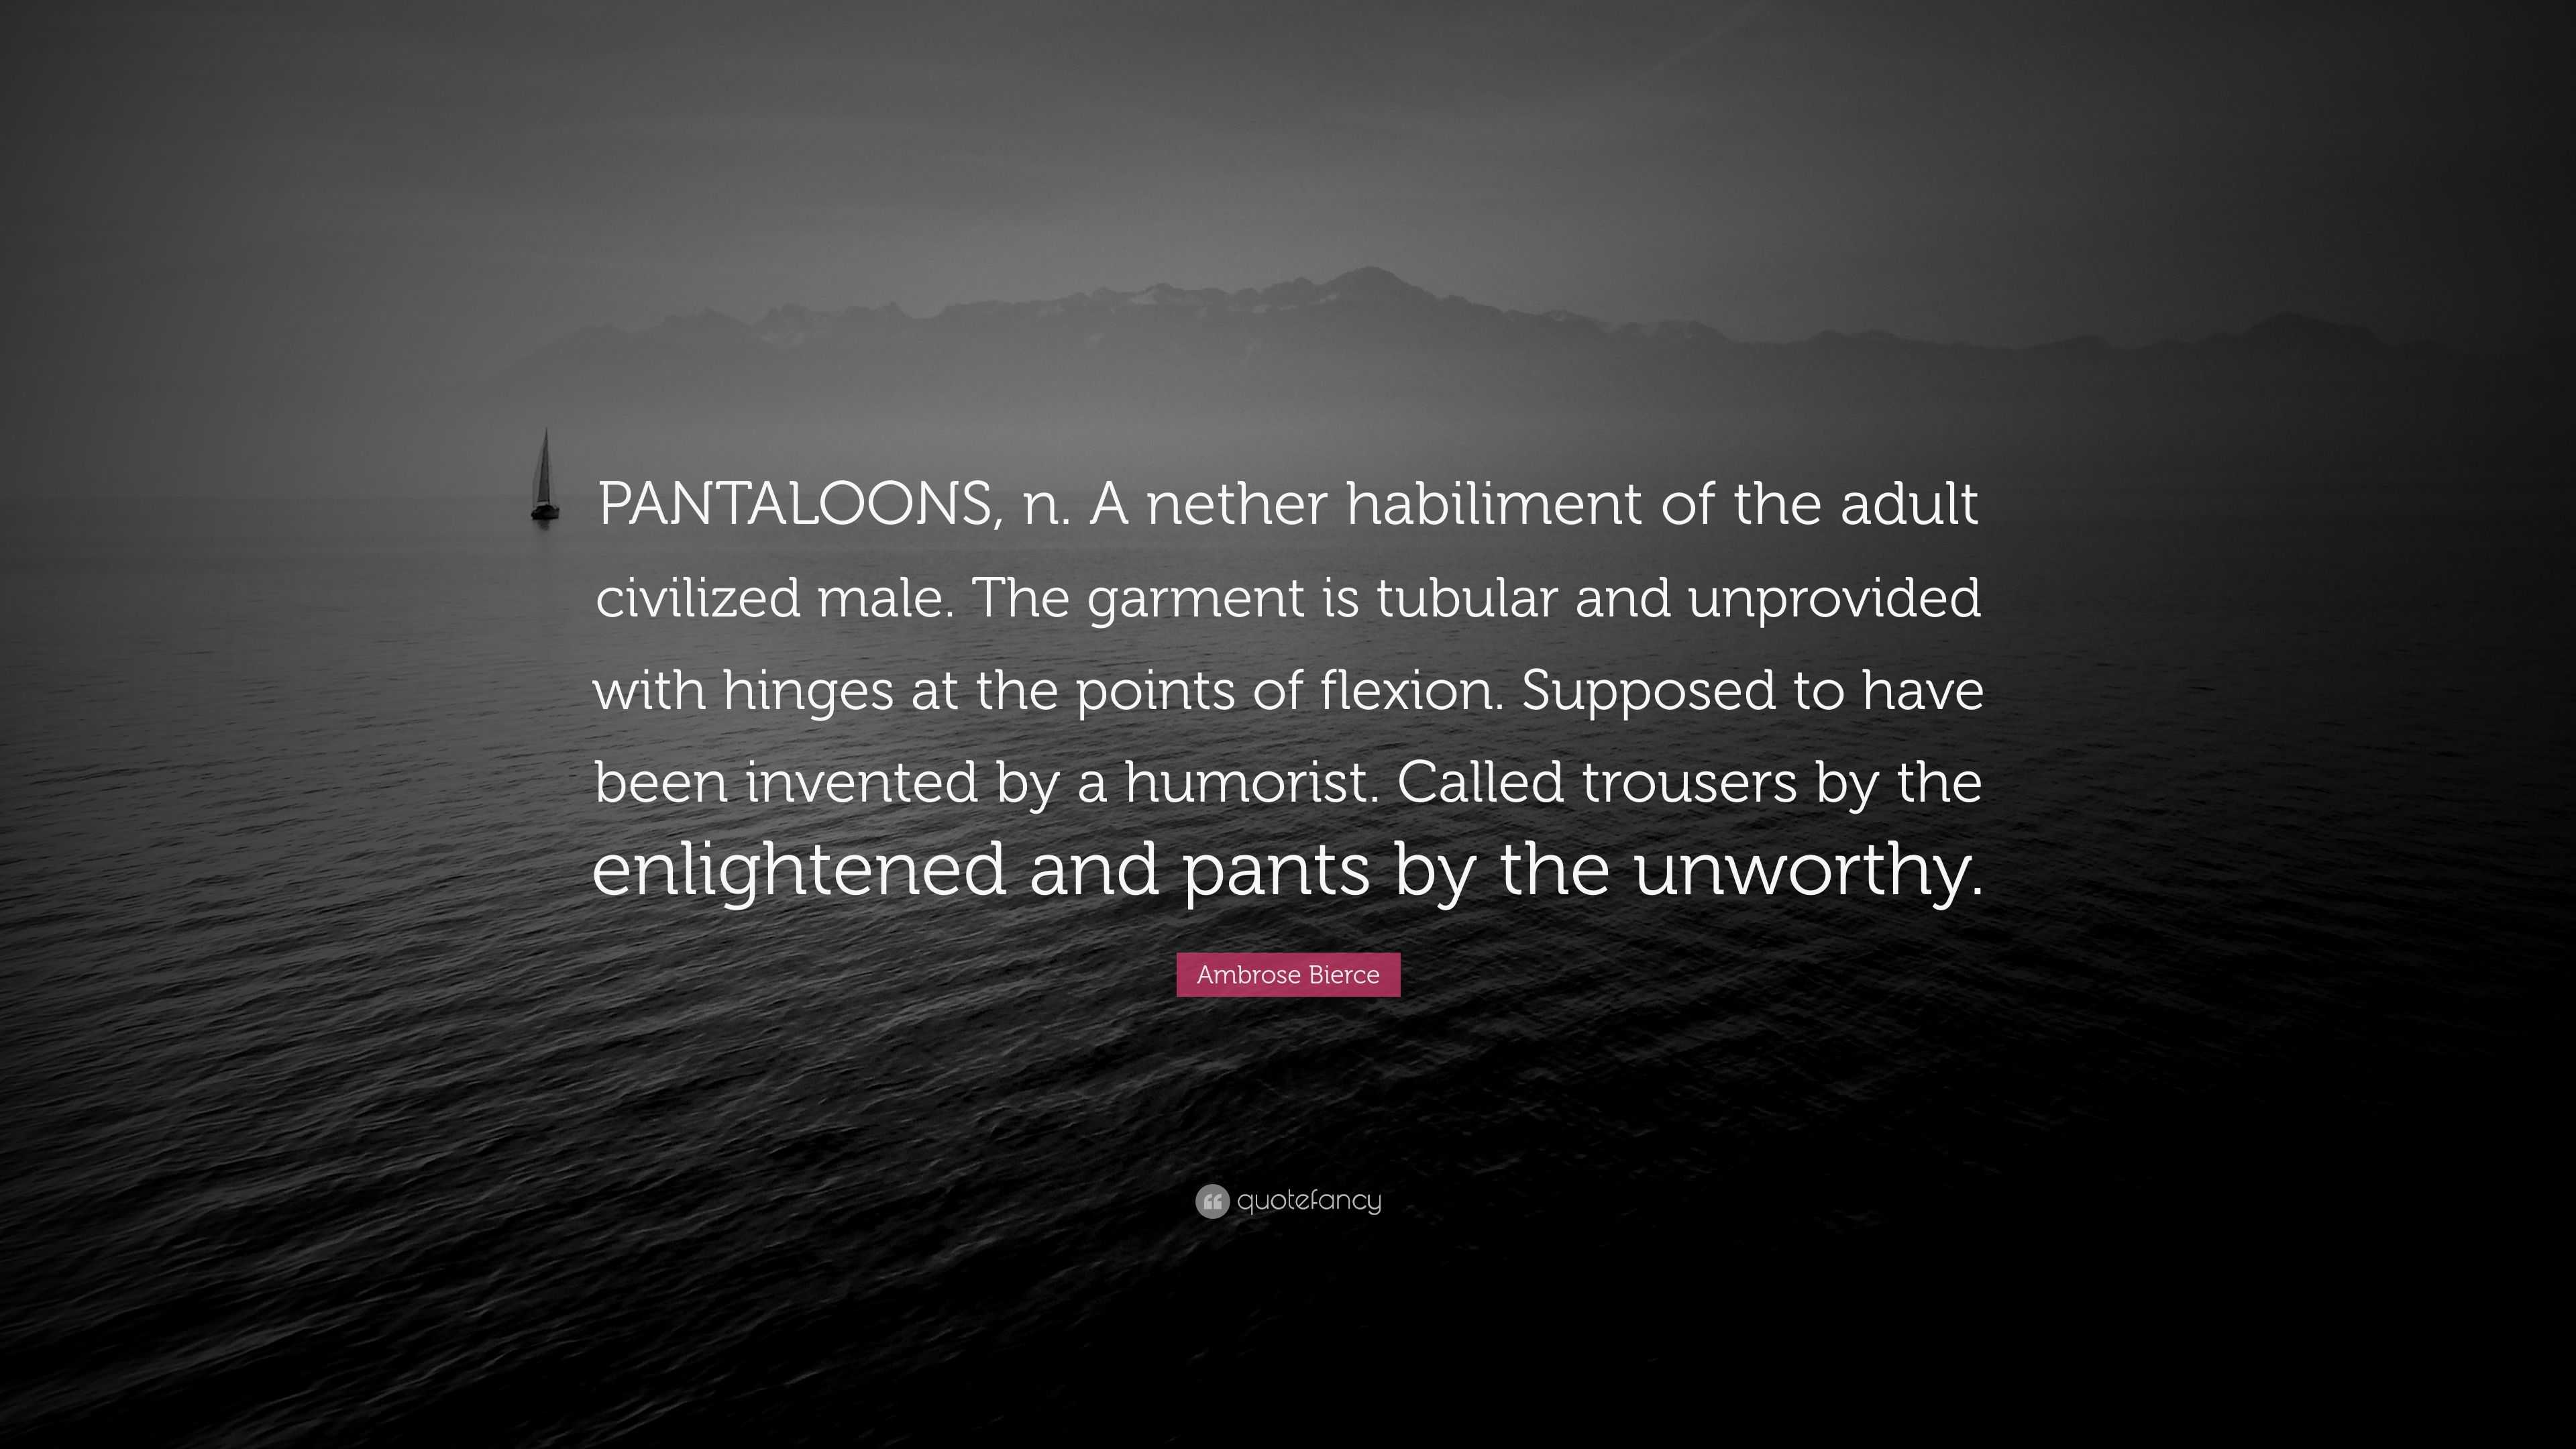 Ambrose Bierce Quote: “PANTALOONS, n. A nether habiliment of the adult ...